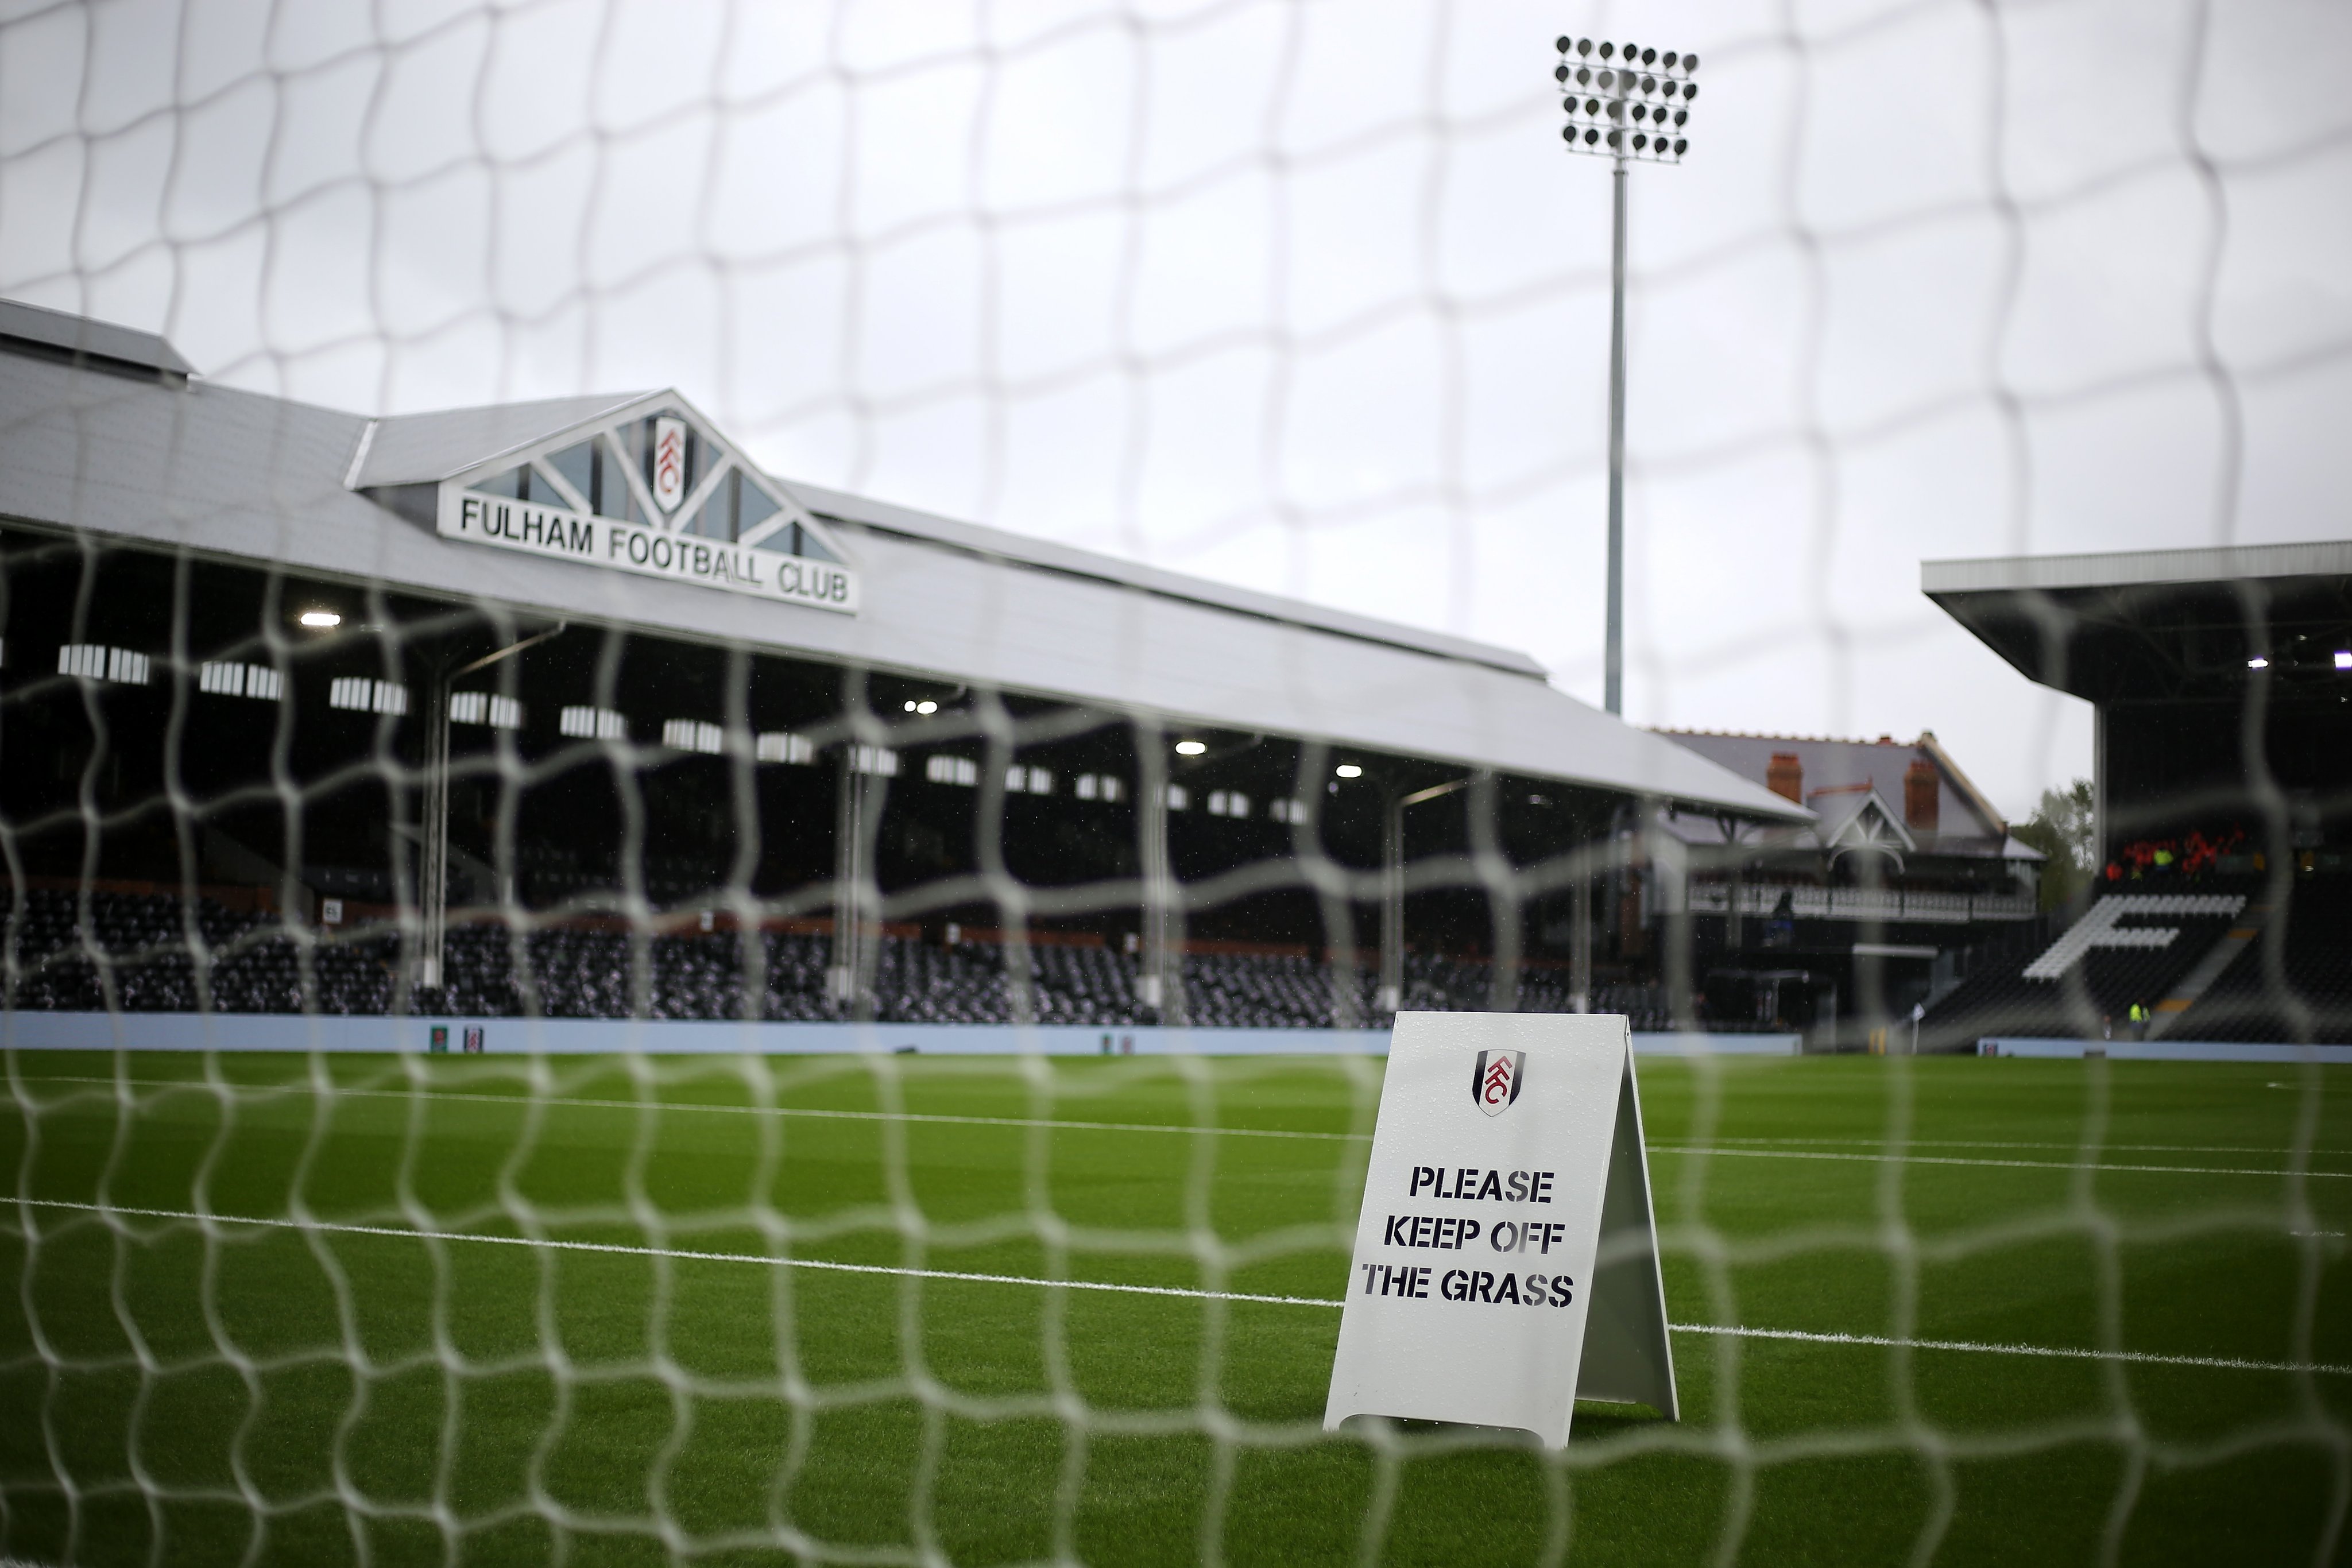 Premier League confirm postponement of Burnley v Fulham game due to COVID-19 positive tests